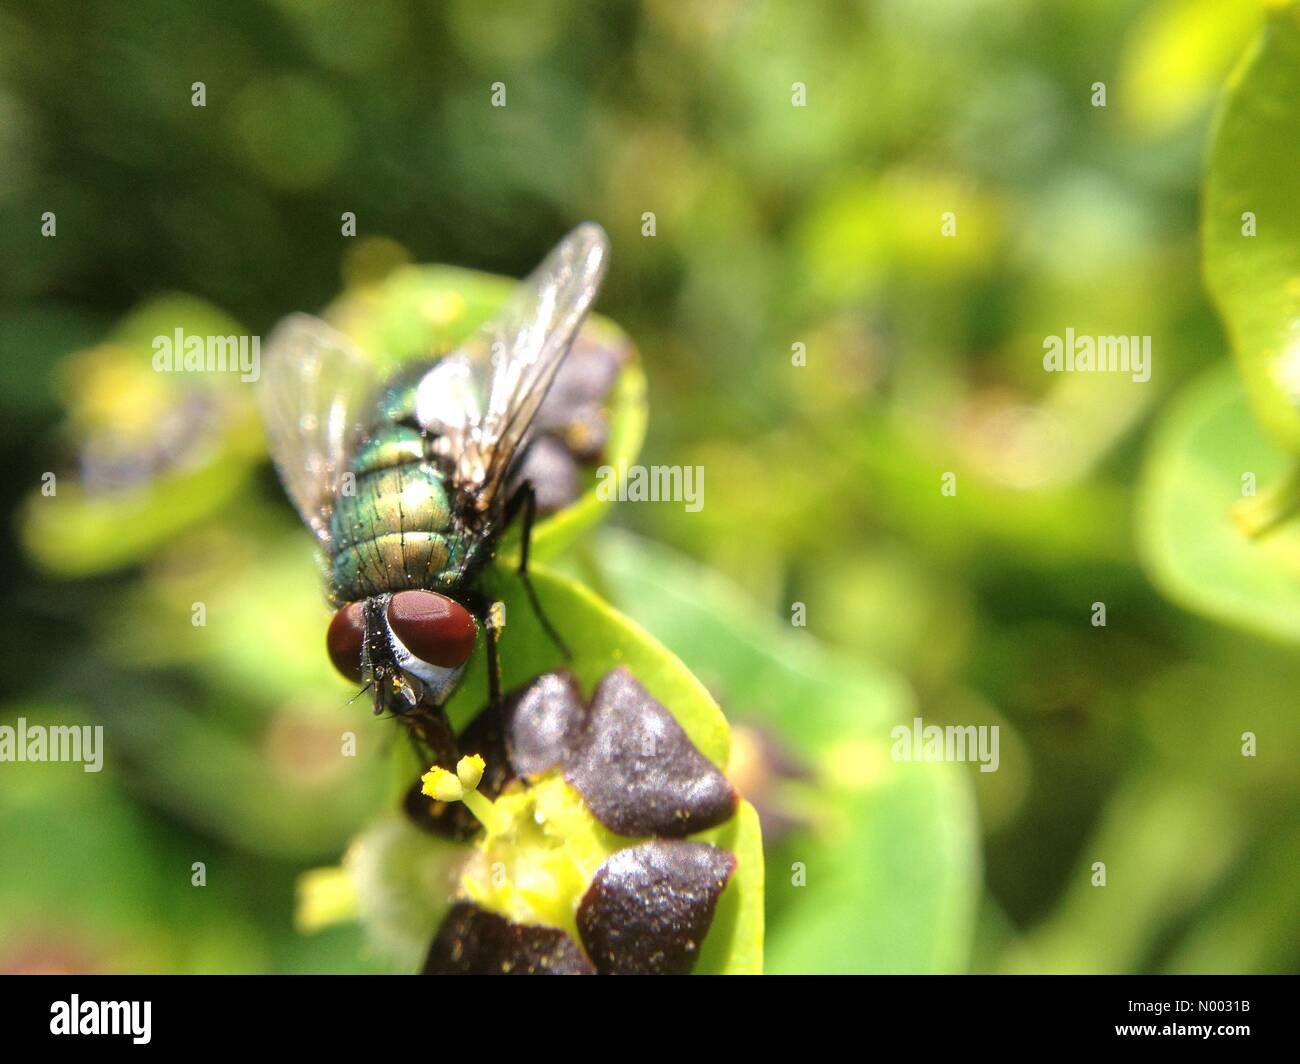 With the sun shining this fly was pollinating a plant at Golden Acre park near Leeds, Yorkshire. Taken on the 26th May 2015. Stock Photo